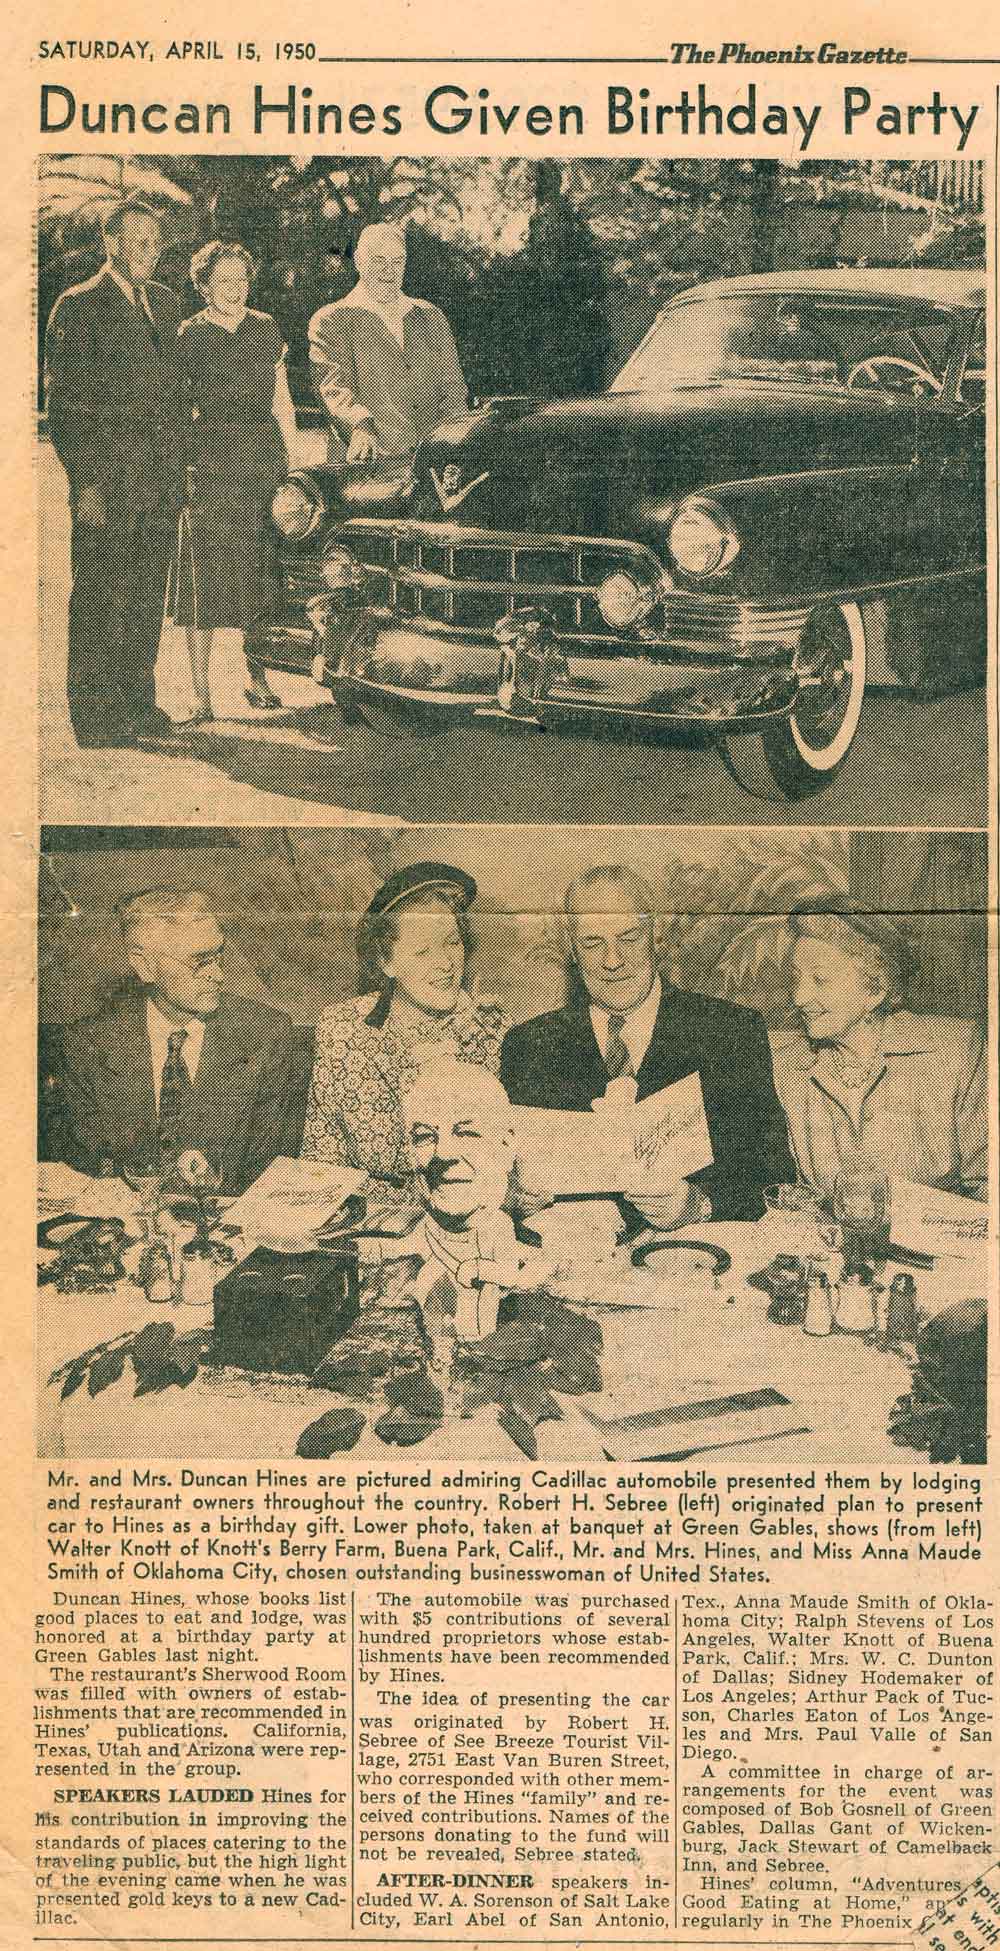 (DOLORES.2010.01.12) - Newspaper clipping on Duncan Hines